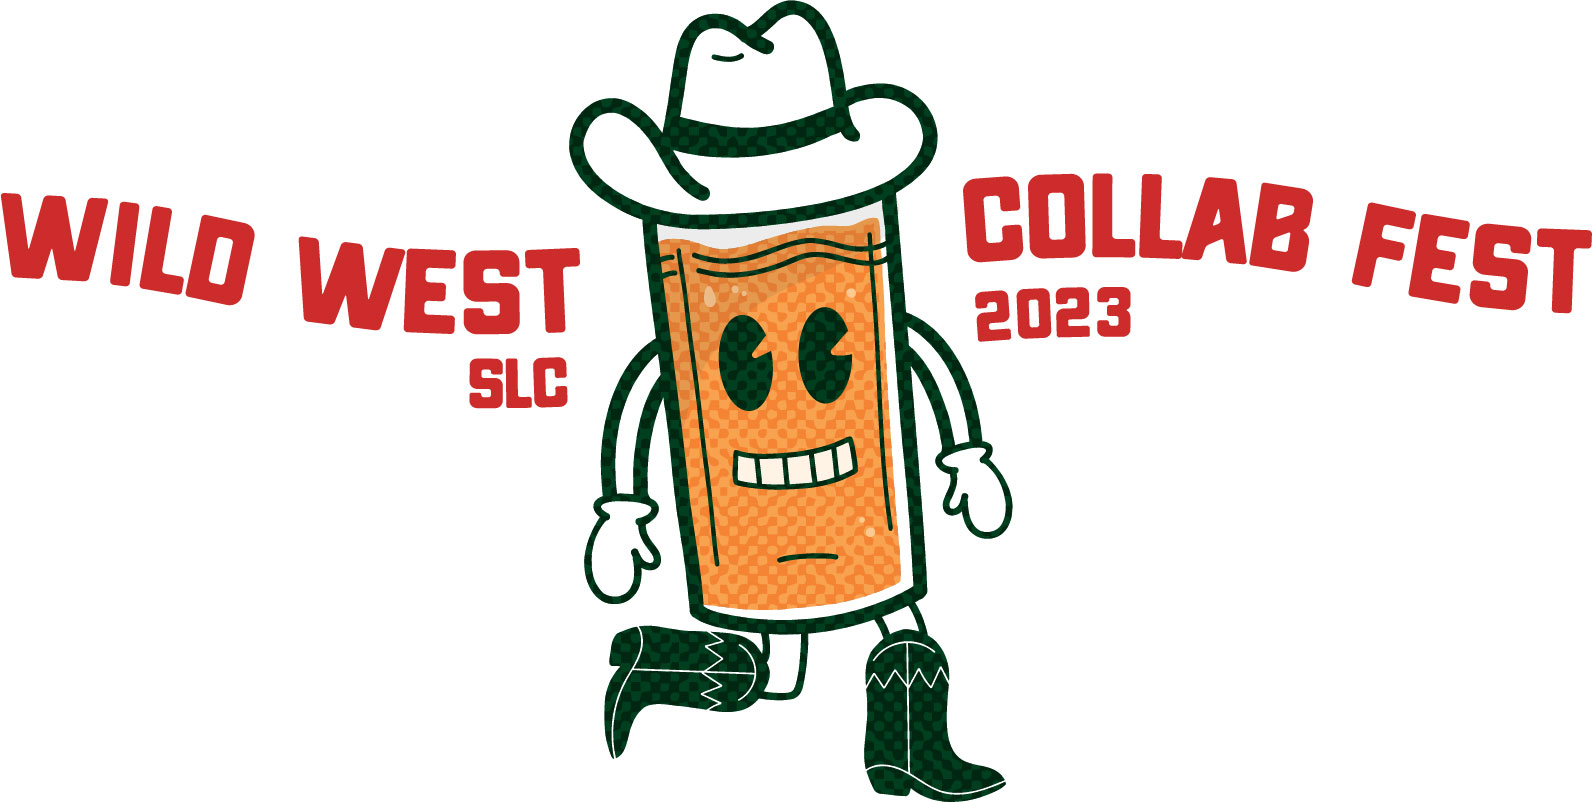 2023WildWestCollabFest-logo_tertiary-color-texture.jpg